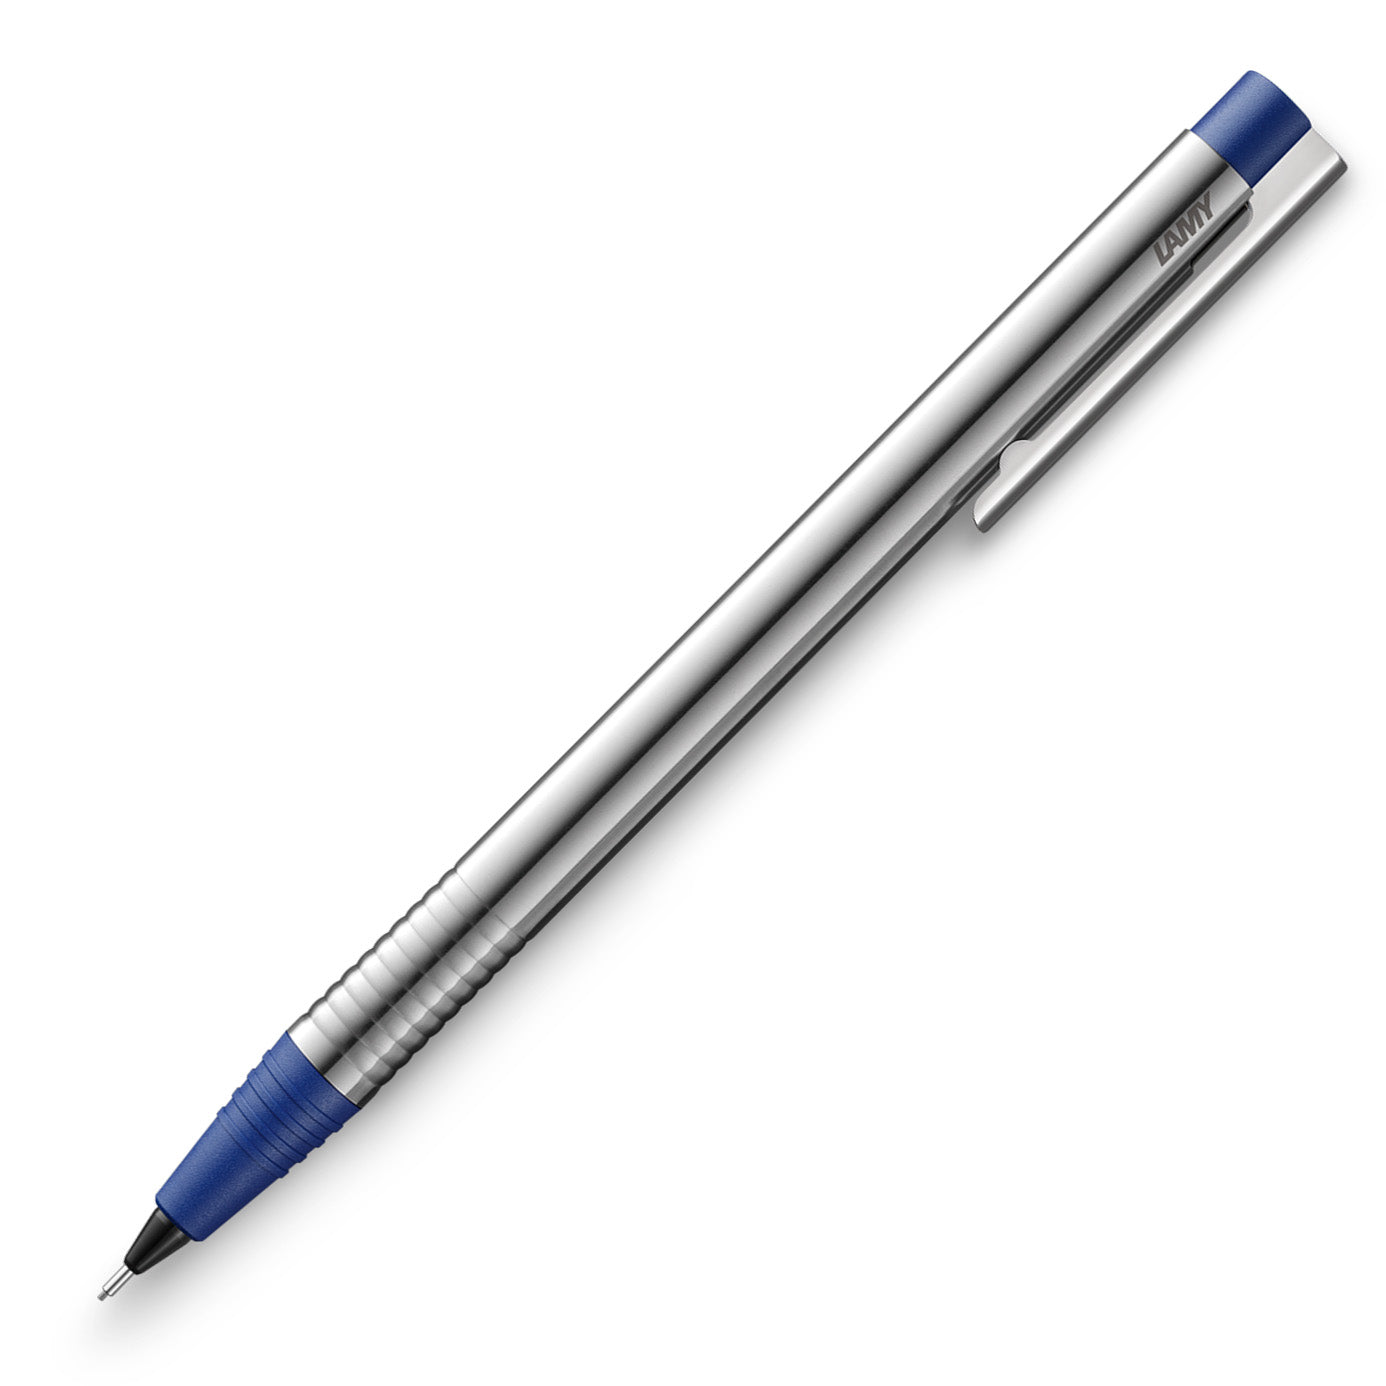 LAMY Logo Pencil 0.5mm - Blue - Mechanical Pencil Made In Germany